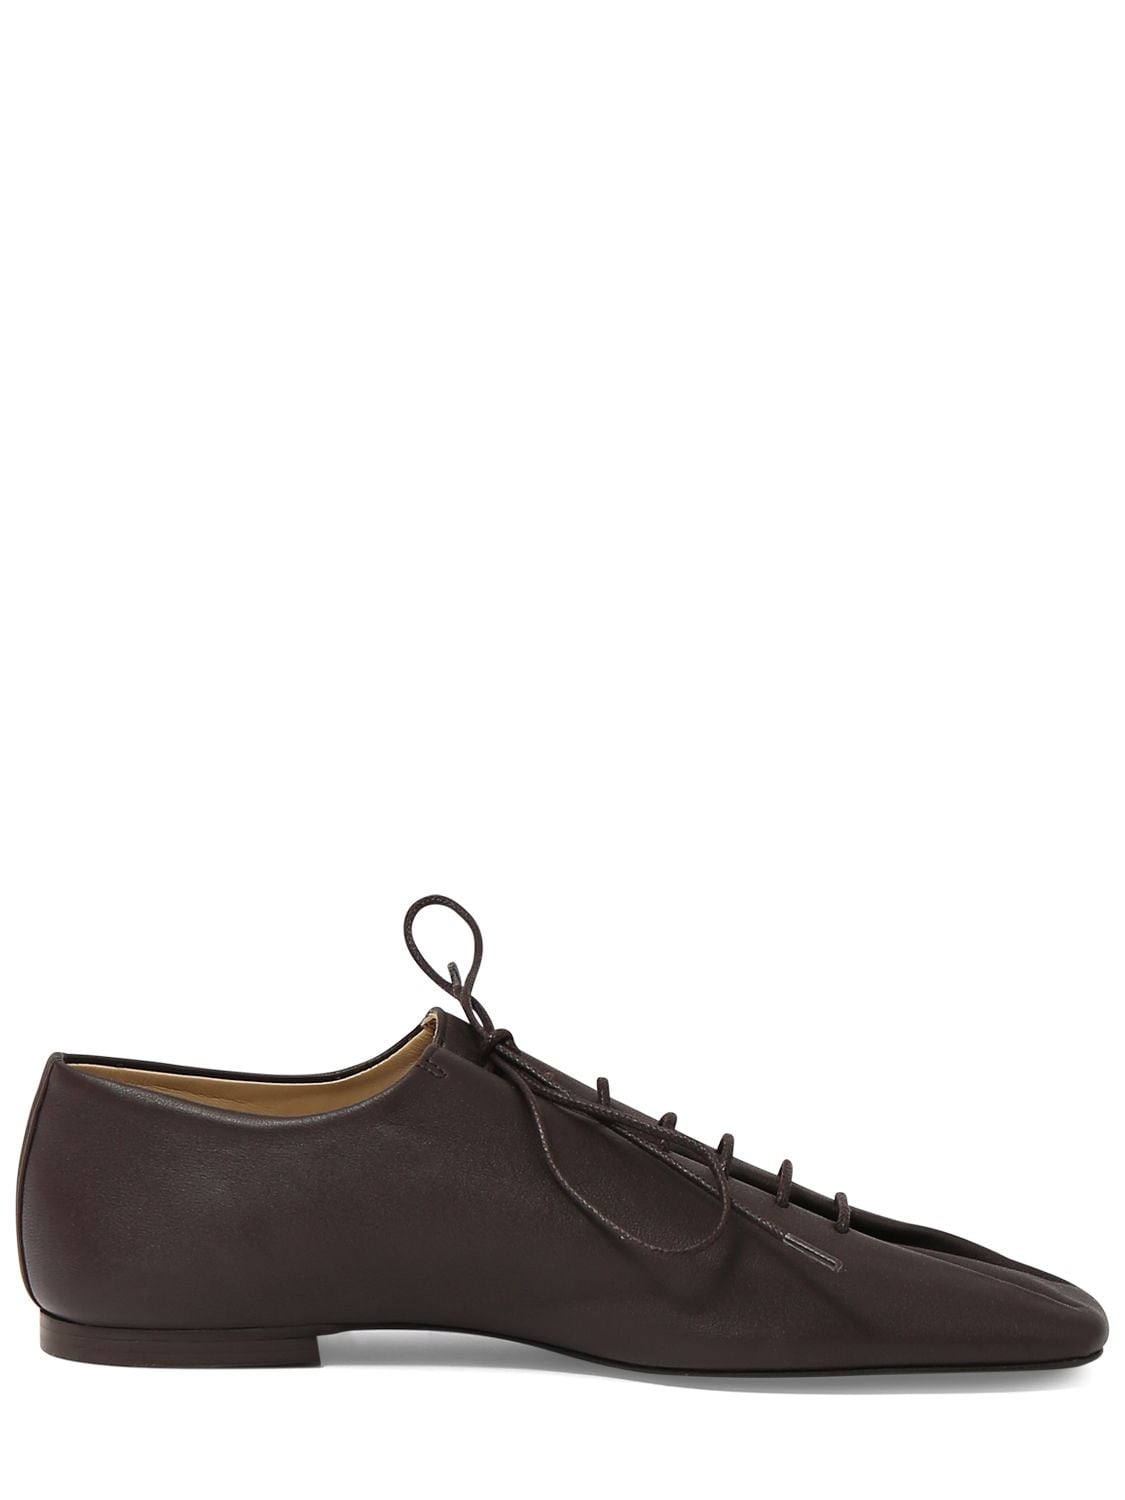 Image of Souris Flat Classic Derby Shoes